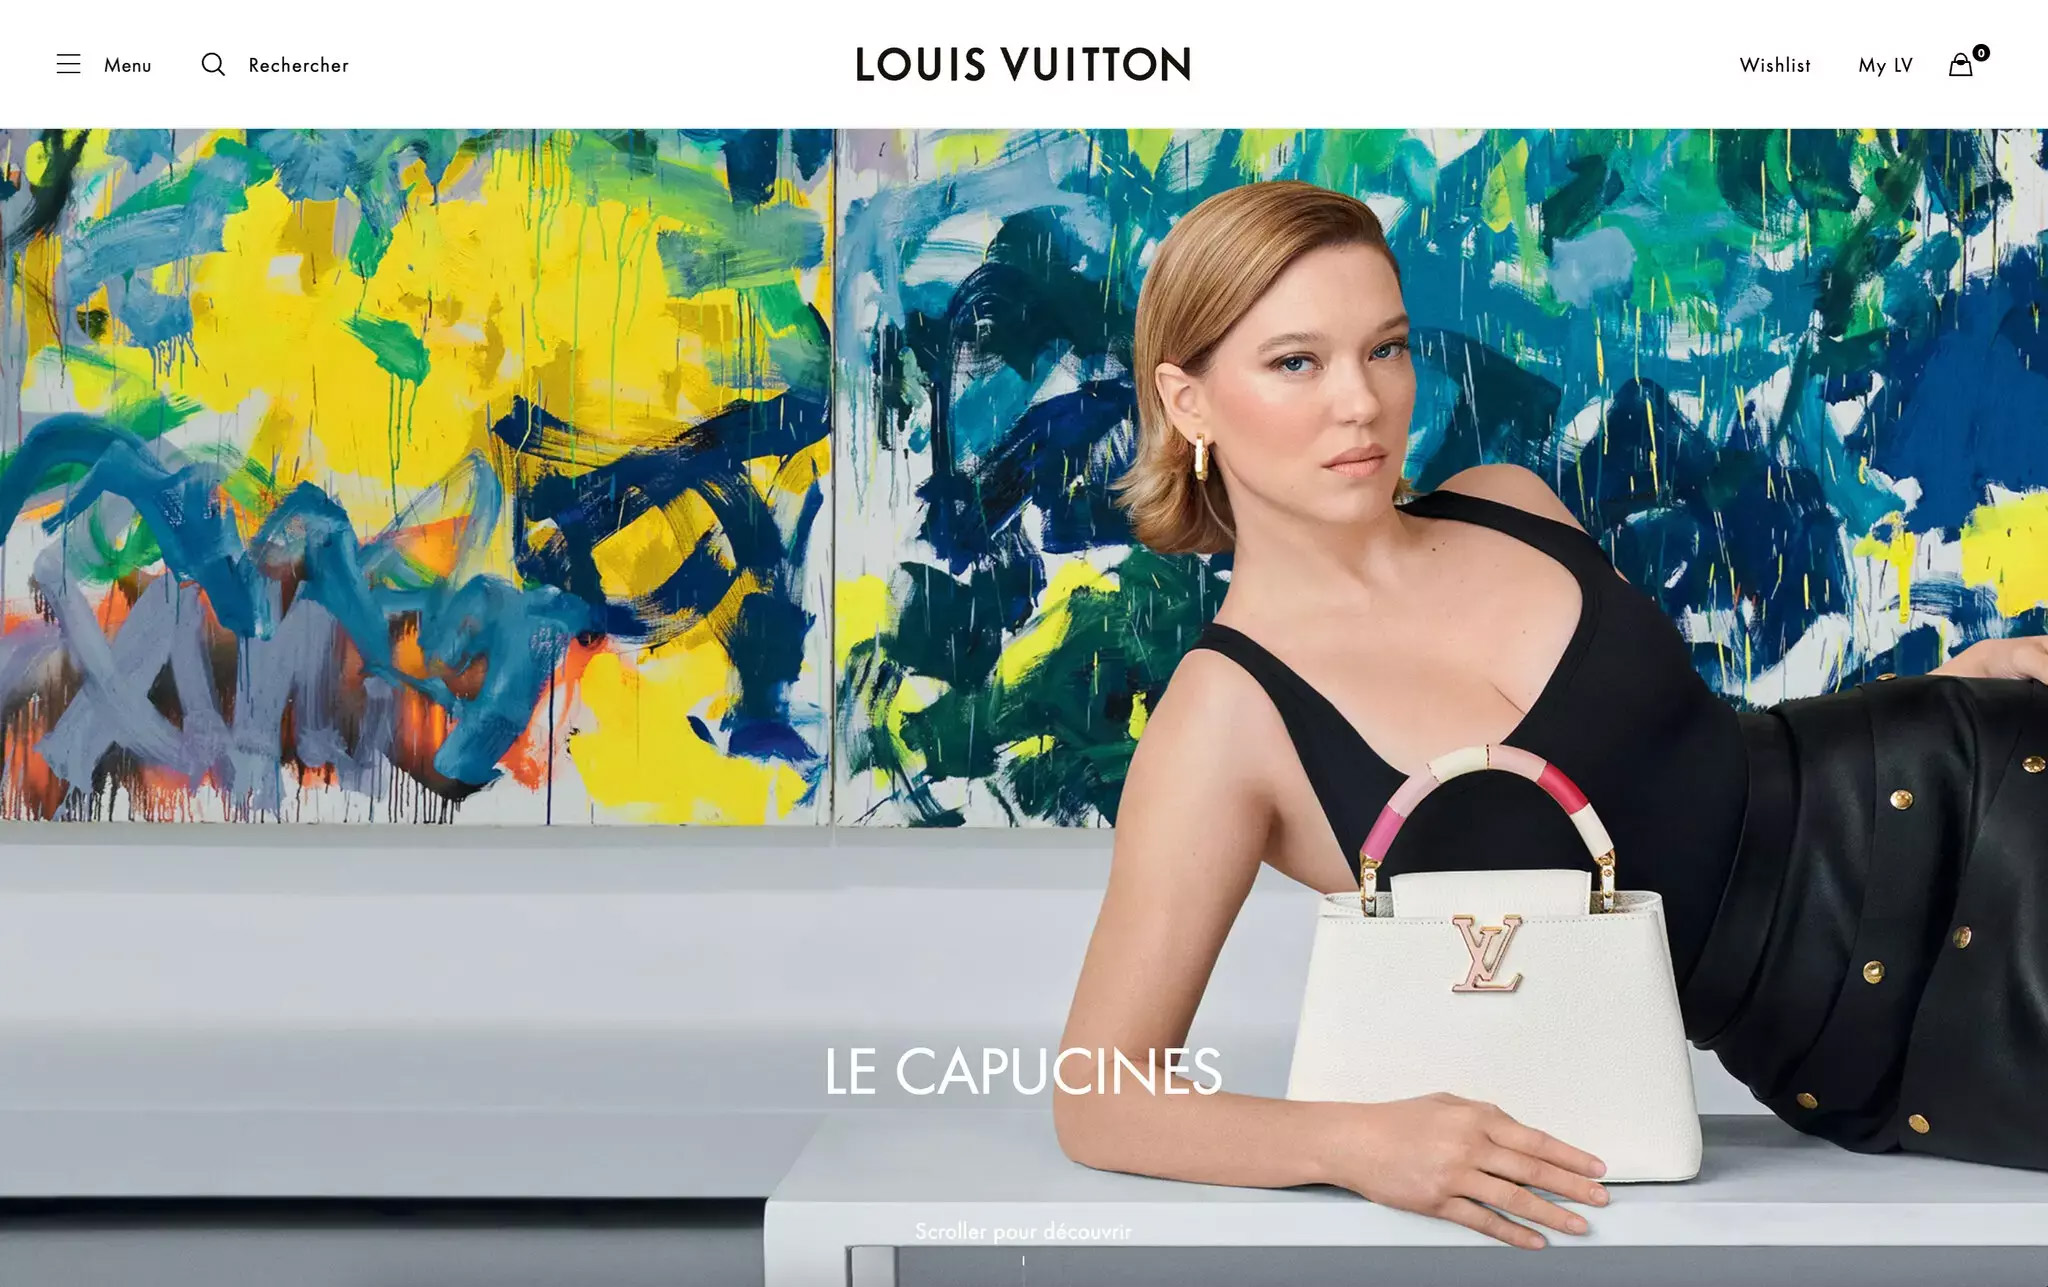 Joan Mitchell foundation threatens legal action over Louis Vuitton